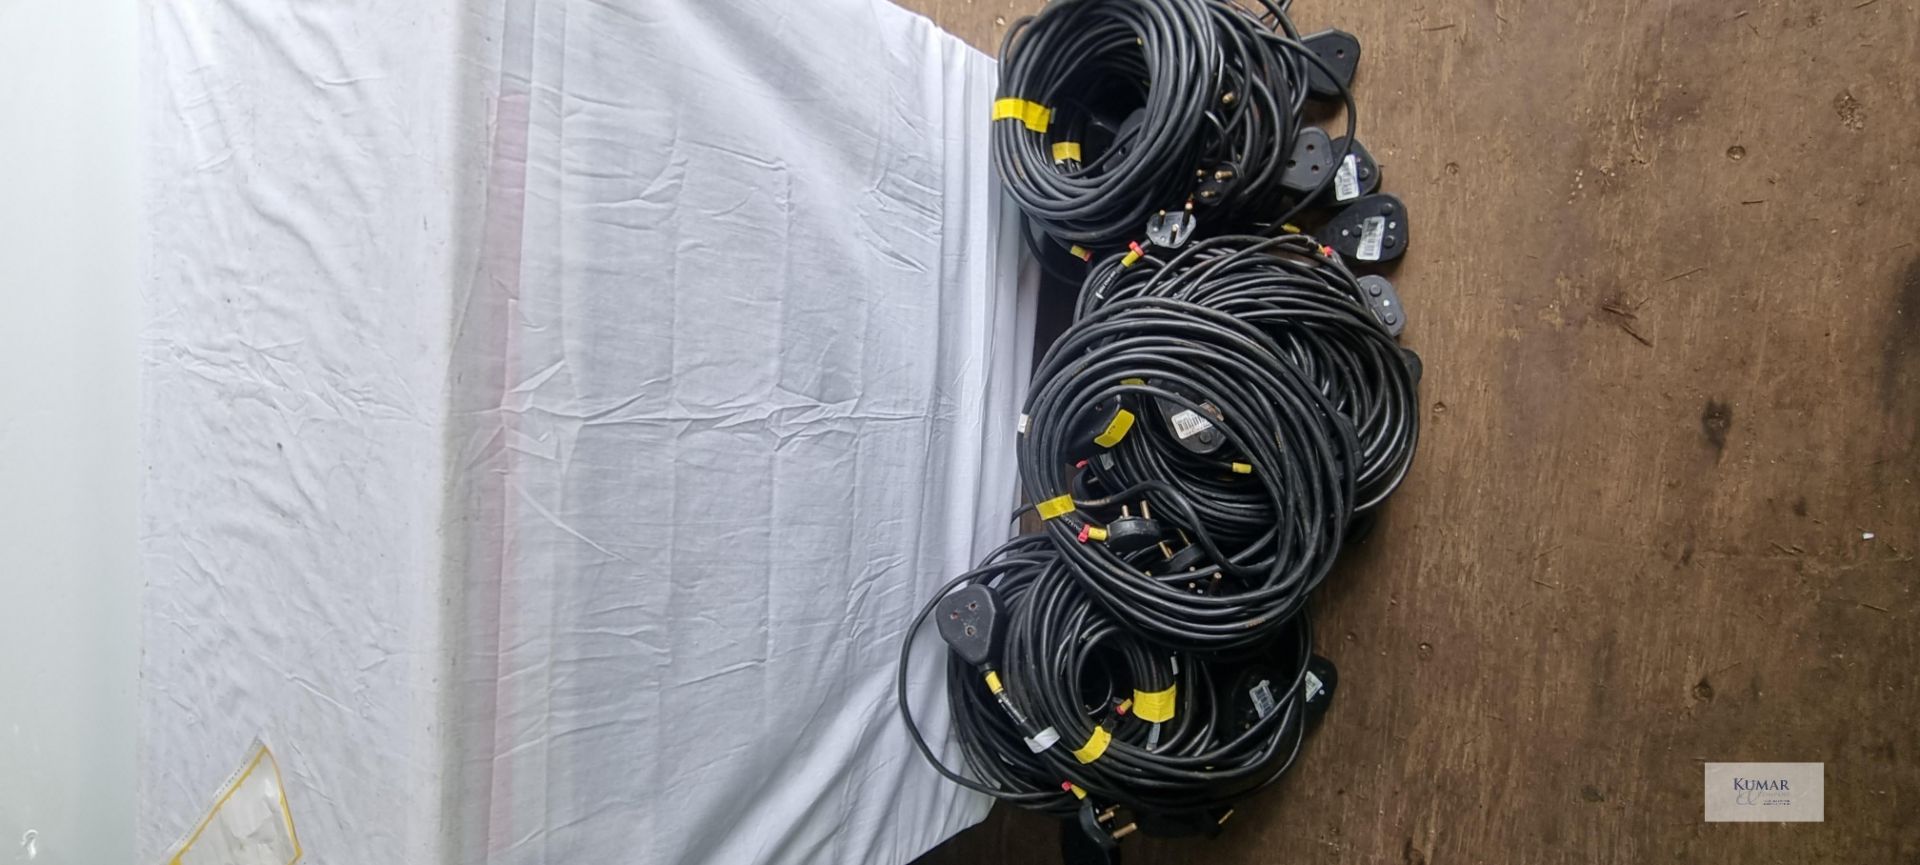 34 x 10m 15a Cable